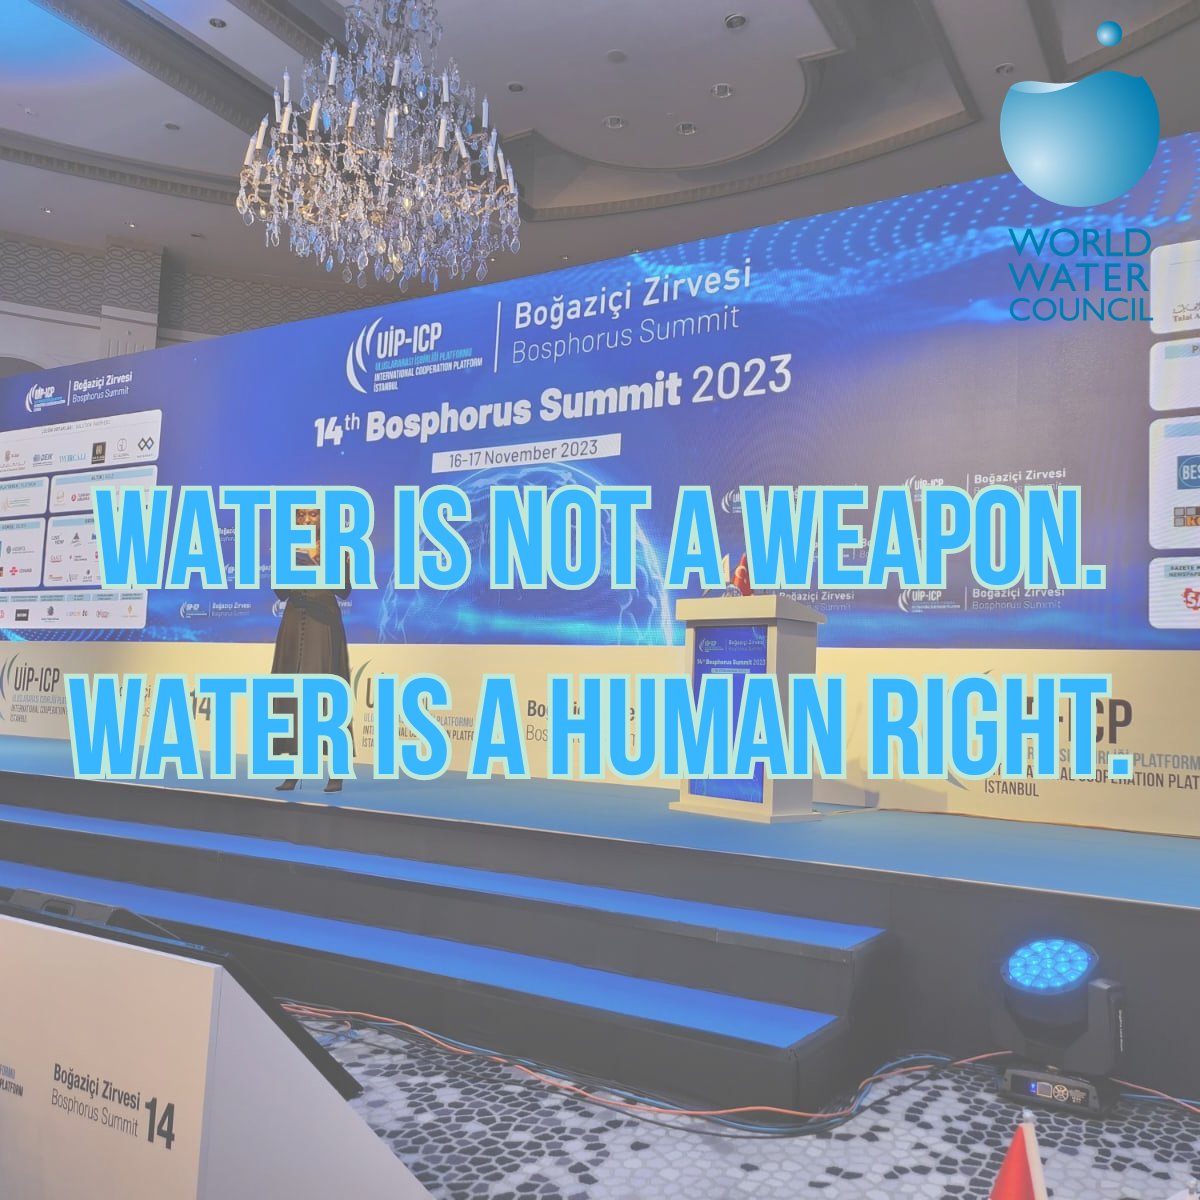 At the World Water Council, we are convinced that Water is a fundamental human right. Pres. of WWC, declared at Bosphorus Summit (16th Nov 2023) : Water is not a weapon. Water is a human right. Water is peace and nobody can be deprived if this individual and collective right.